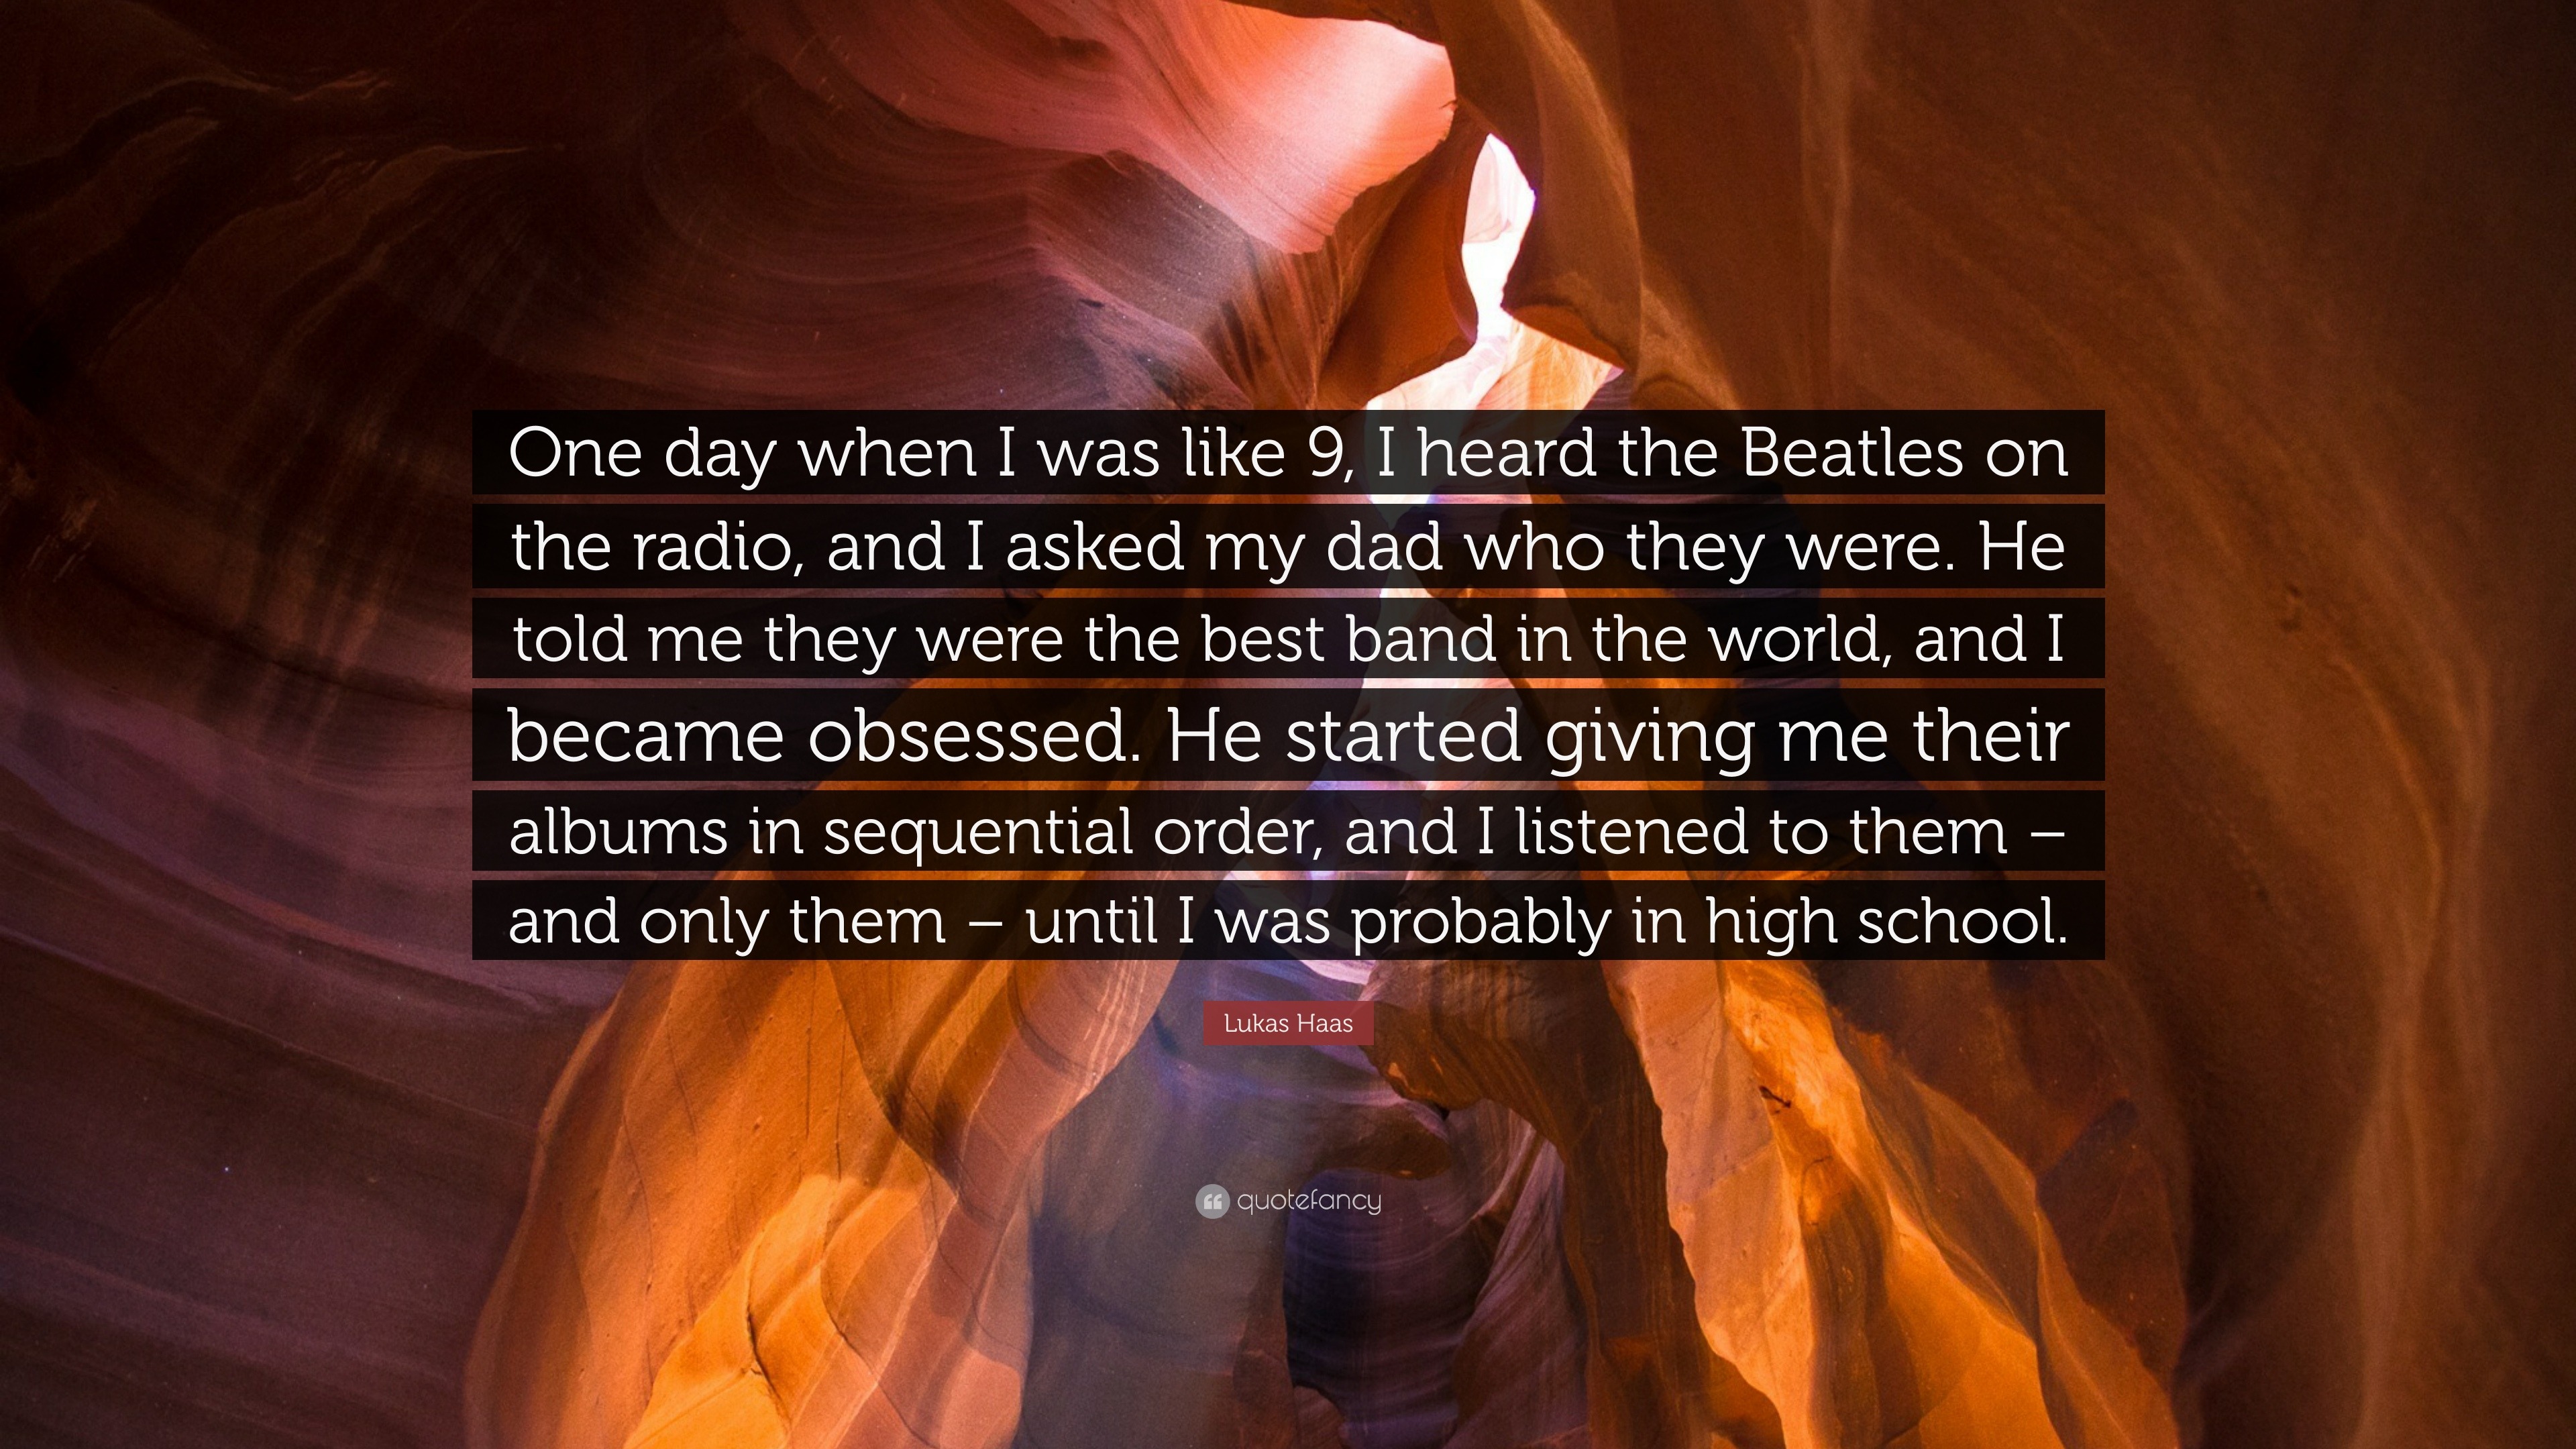 Lukas Haas Quote: “One day when I was like 9, I heard the Beatles on the  radio, and I asked my dad who they were. He told me they were the ...”